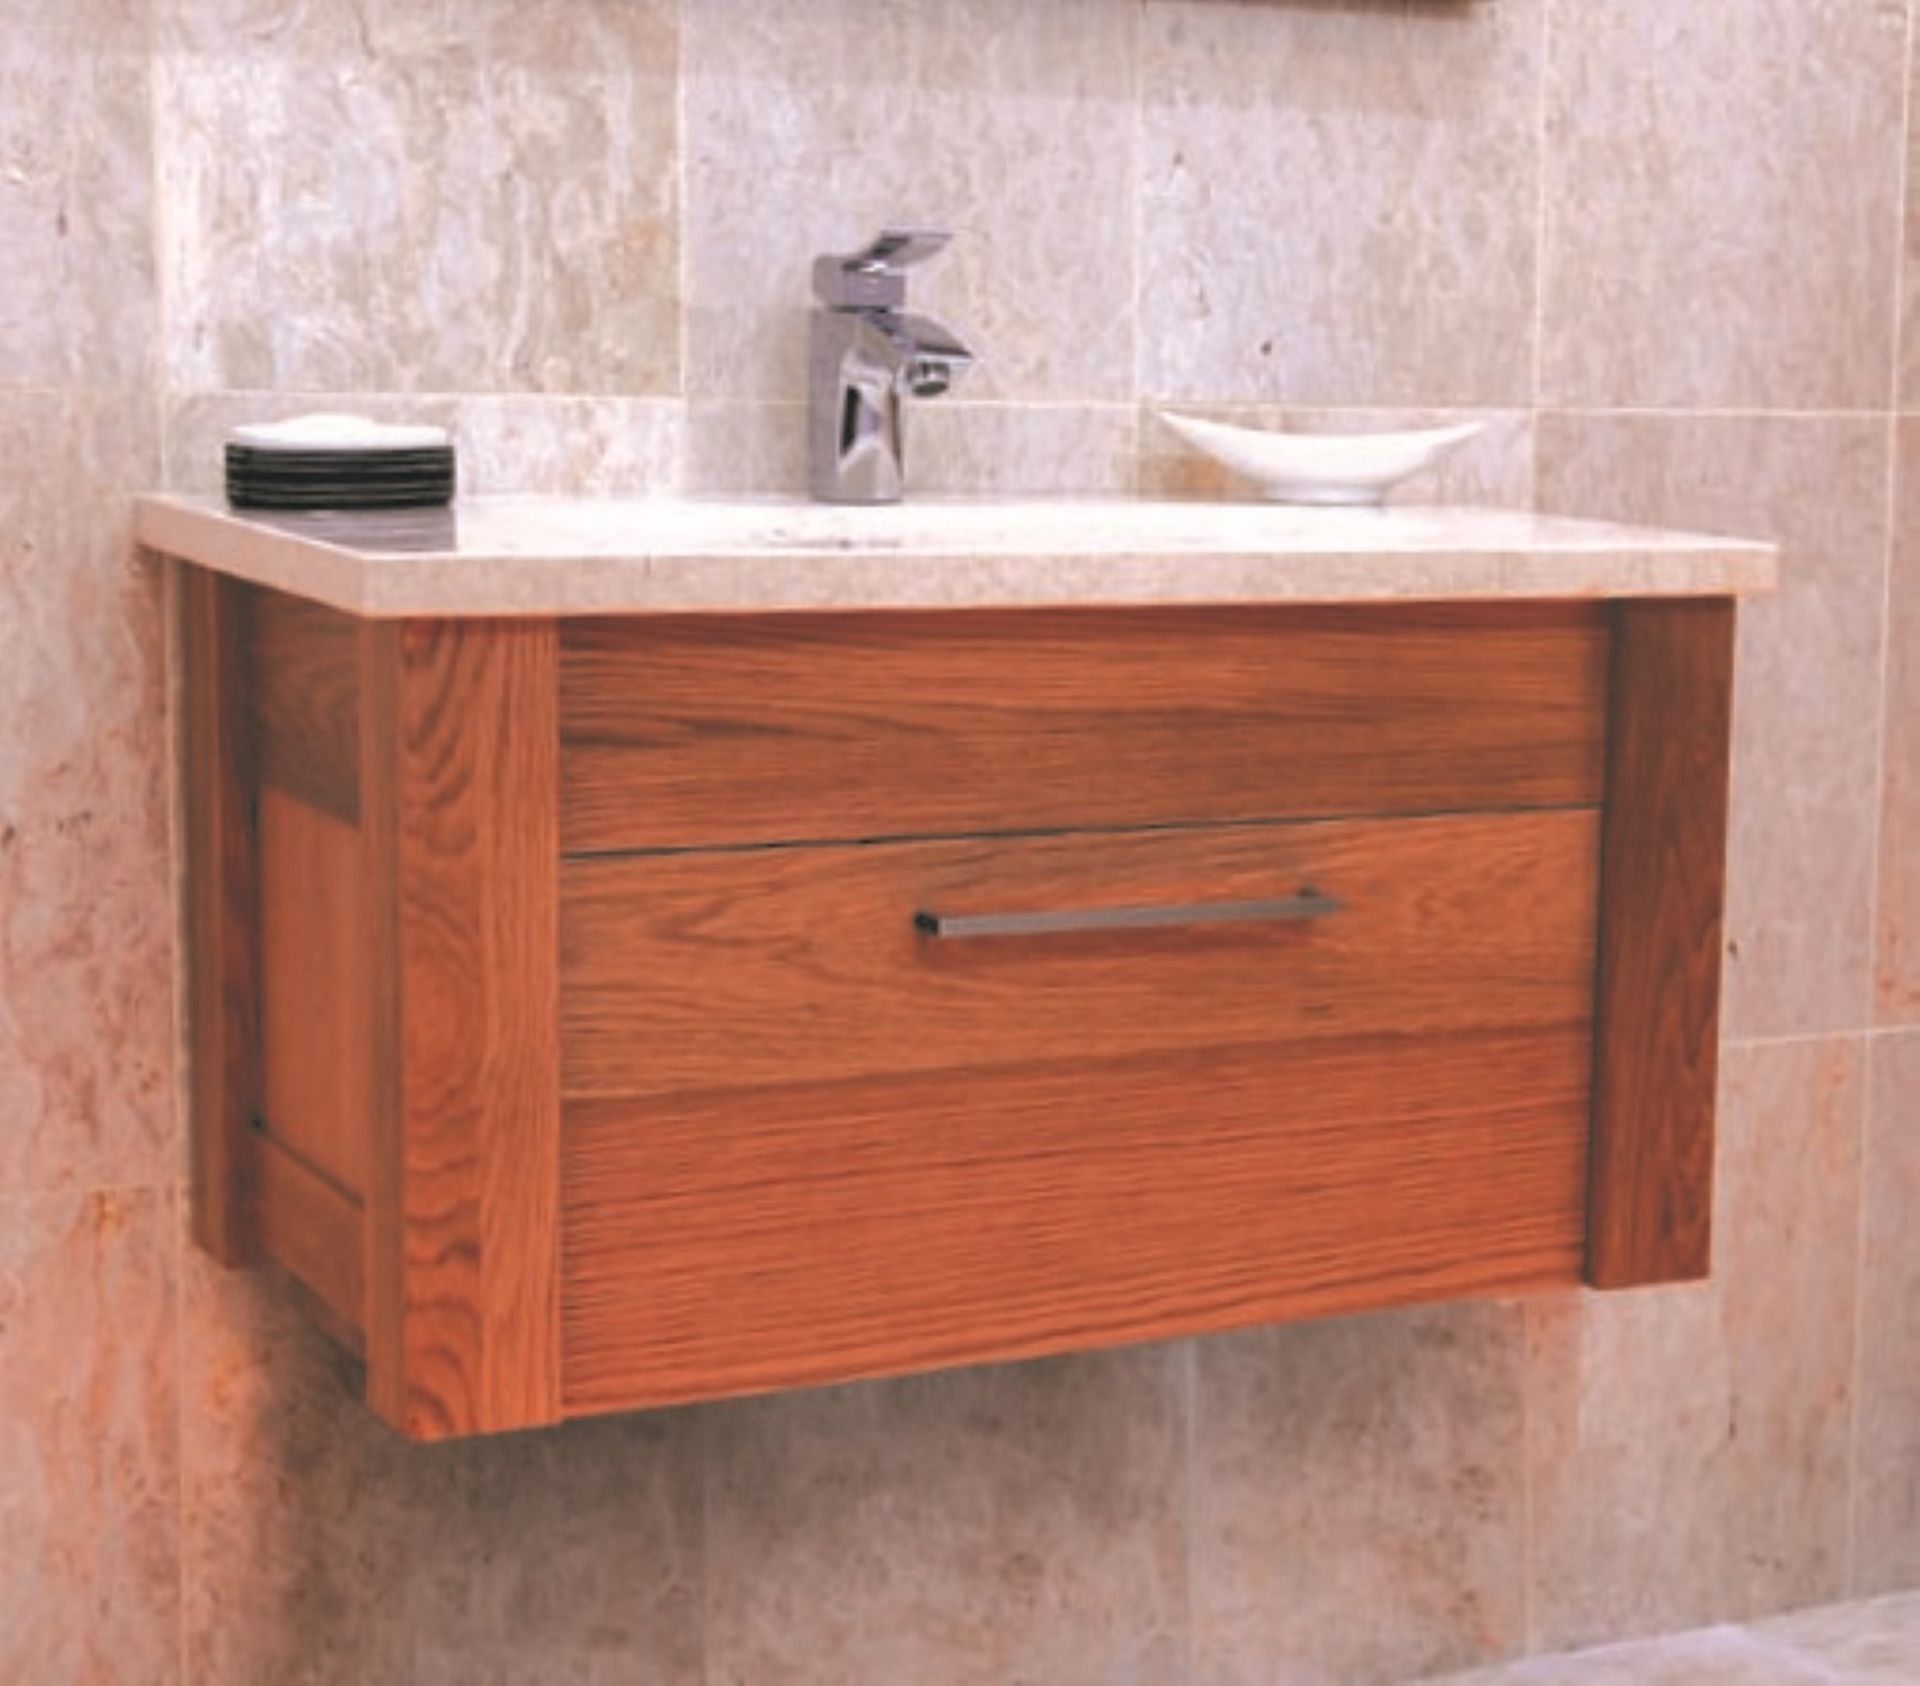 1 x Stonearth 'Venice' Wall Mounted 760mm Washstand - American Solid Walnut - Original RRP £1,169 - Image 8 of 10